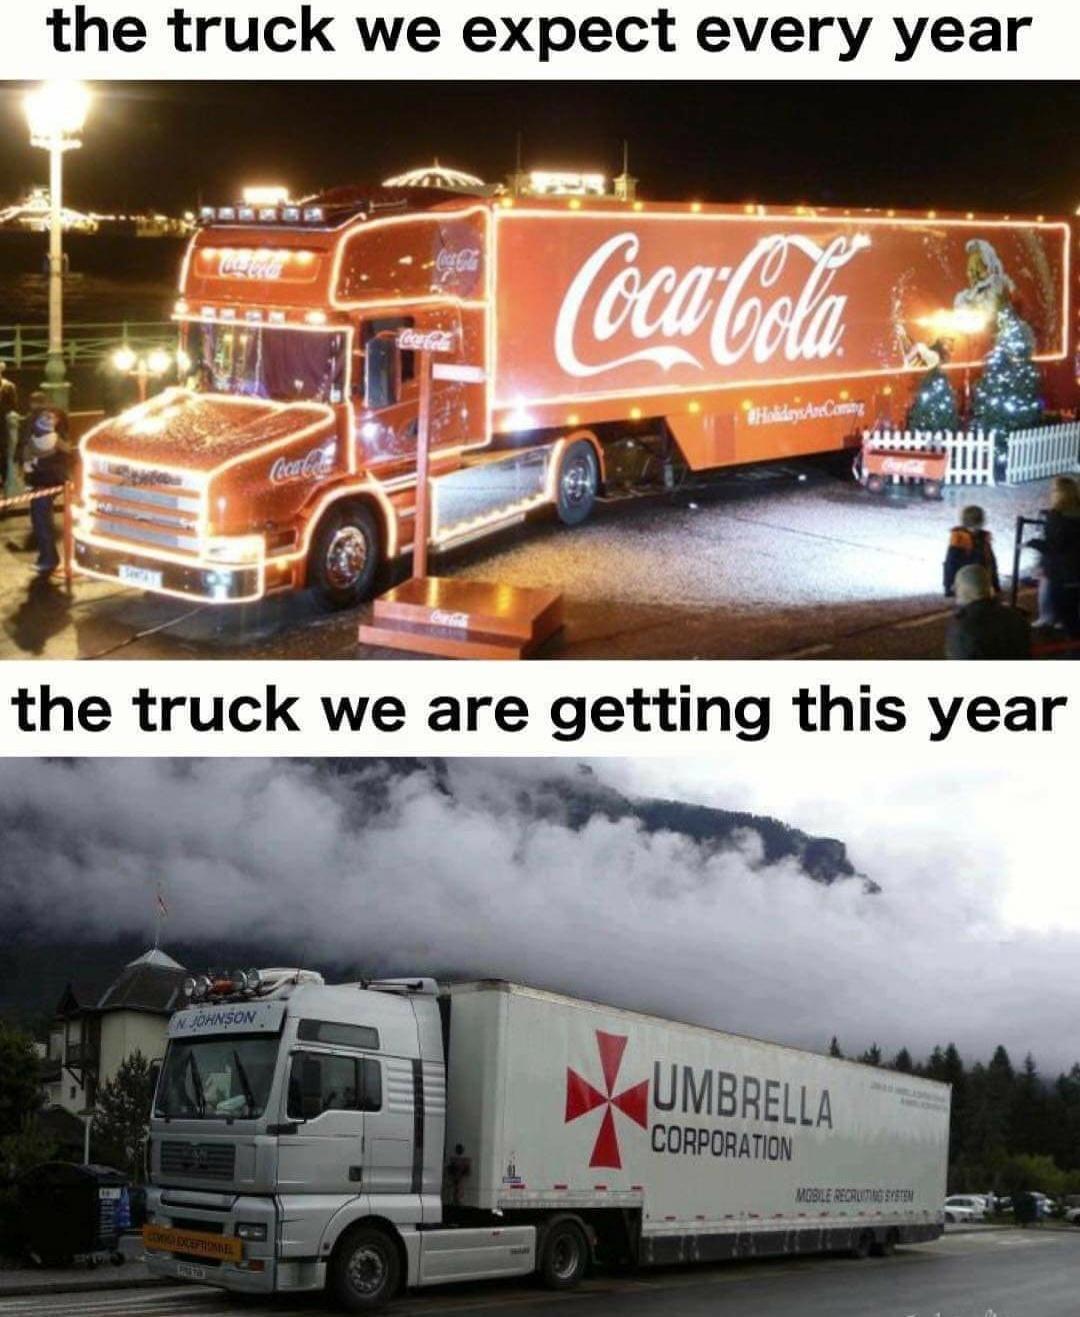 coca cola umbrella corporation - the truck we expect every year colore CocaCola MohdojxAre Coming Caree the truck we are getting this year N Johnson Umbrella Corporation Module Recruiting System Dude